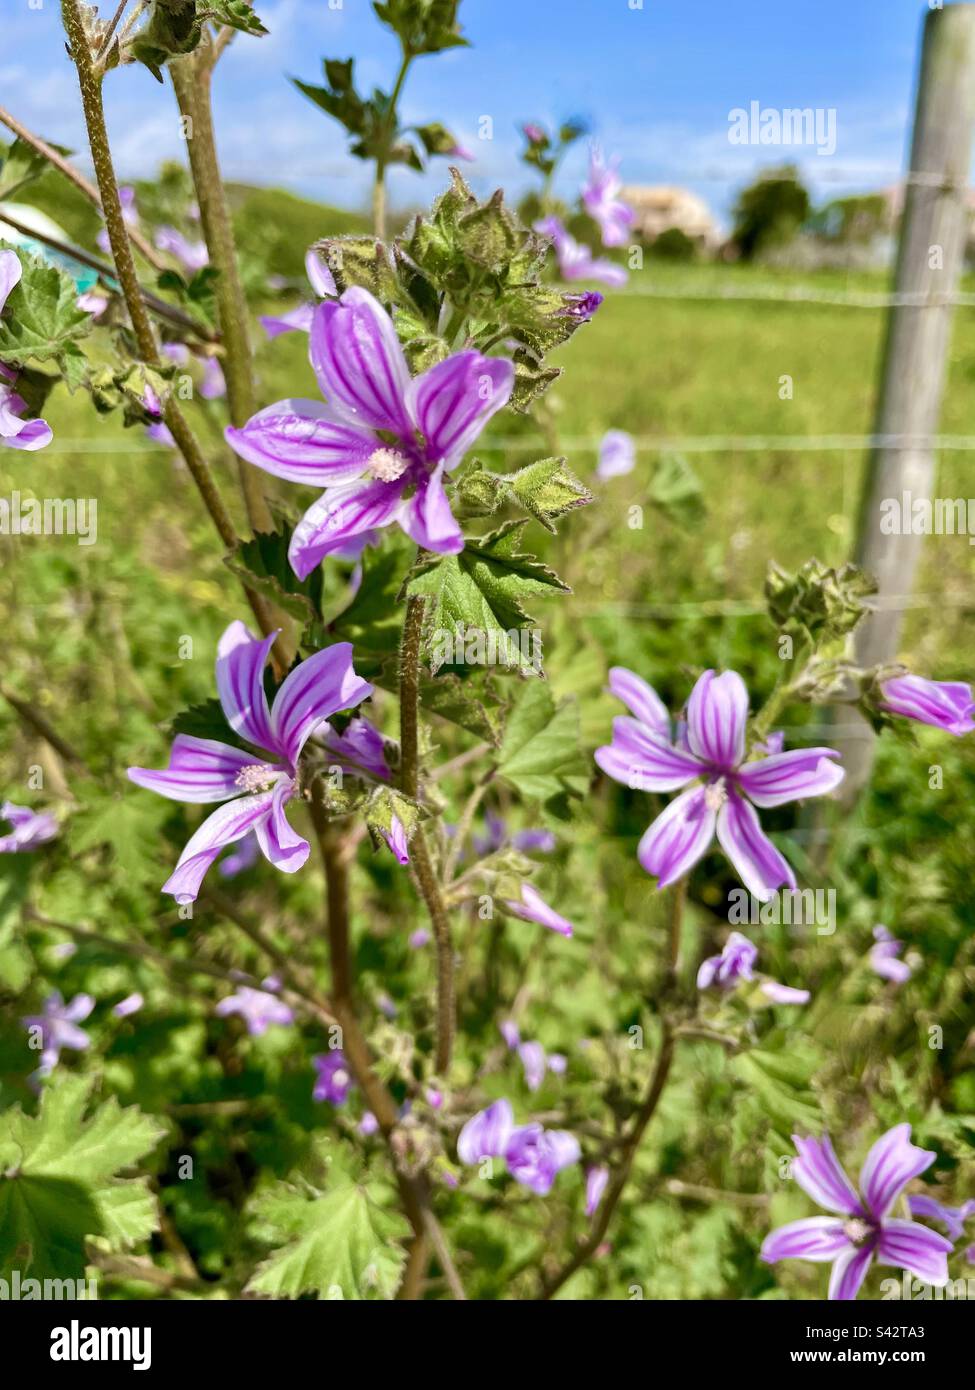 Pink and purple wildflowers the Malva sylvestris is also known as the common mallow. These wildflowers are found in the Algarve region of Portugal Stock Photo